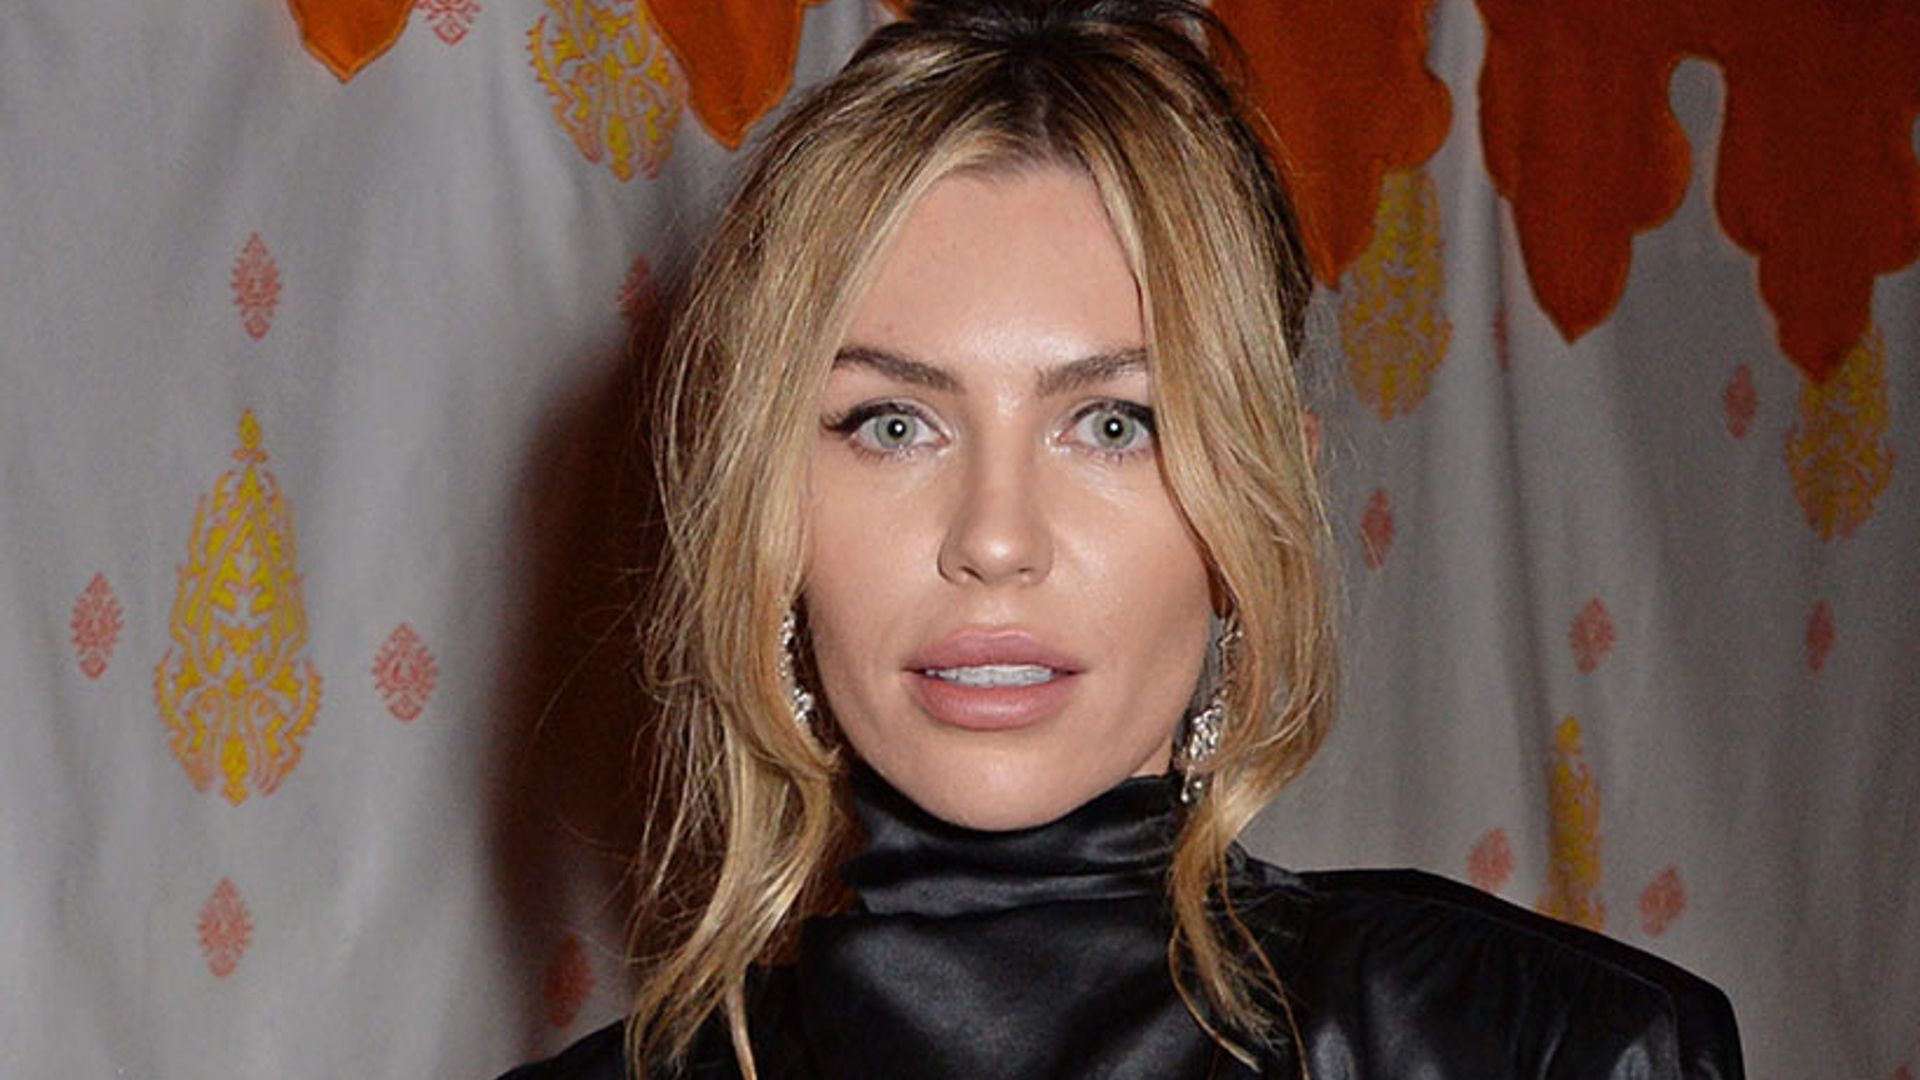 You won't believe how much Abbey Clancy's slippers cost from Peter Crouch